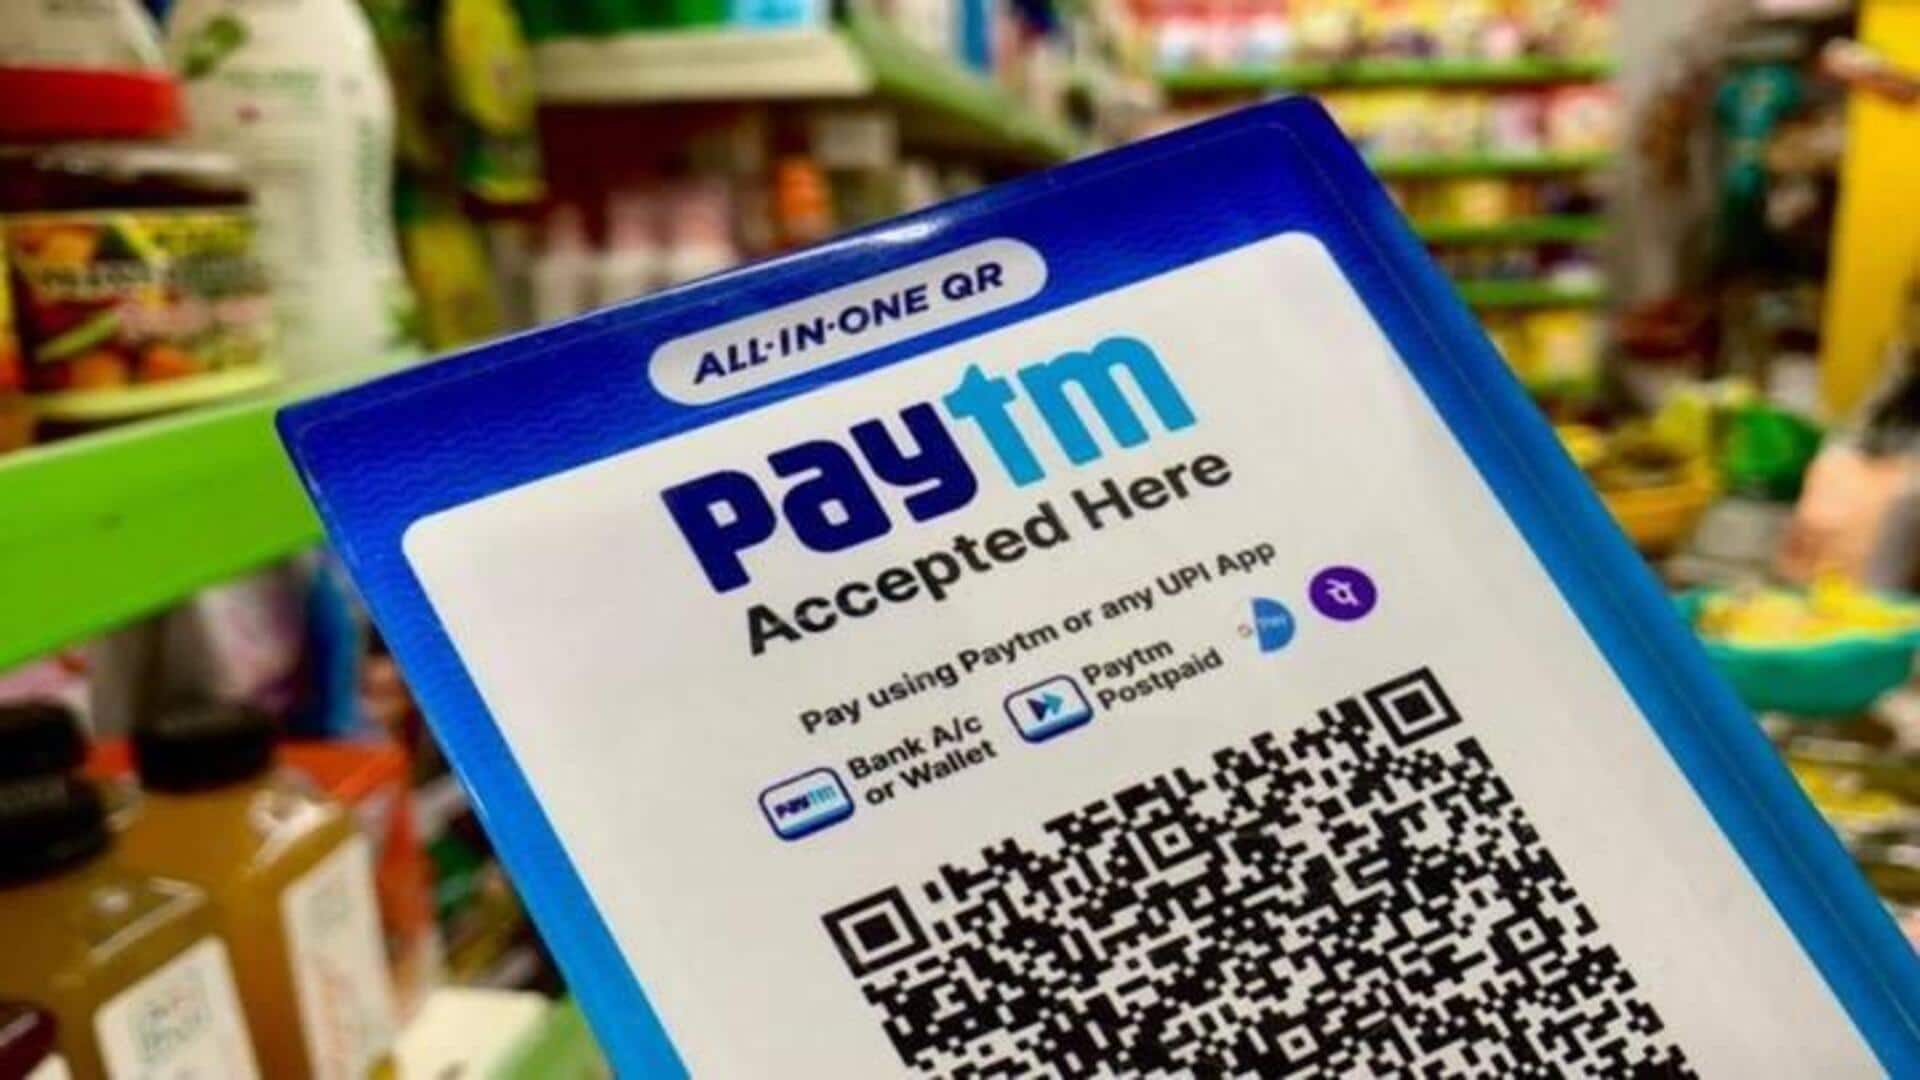 Paytm secures NPCI approval to operate as third-party UPI app